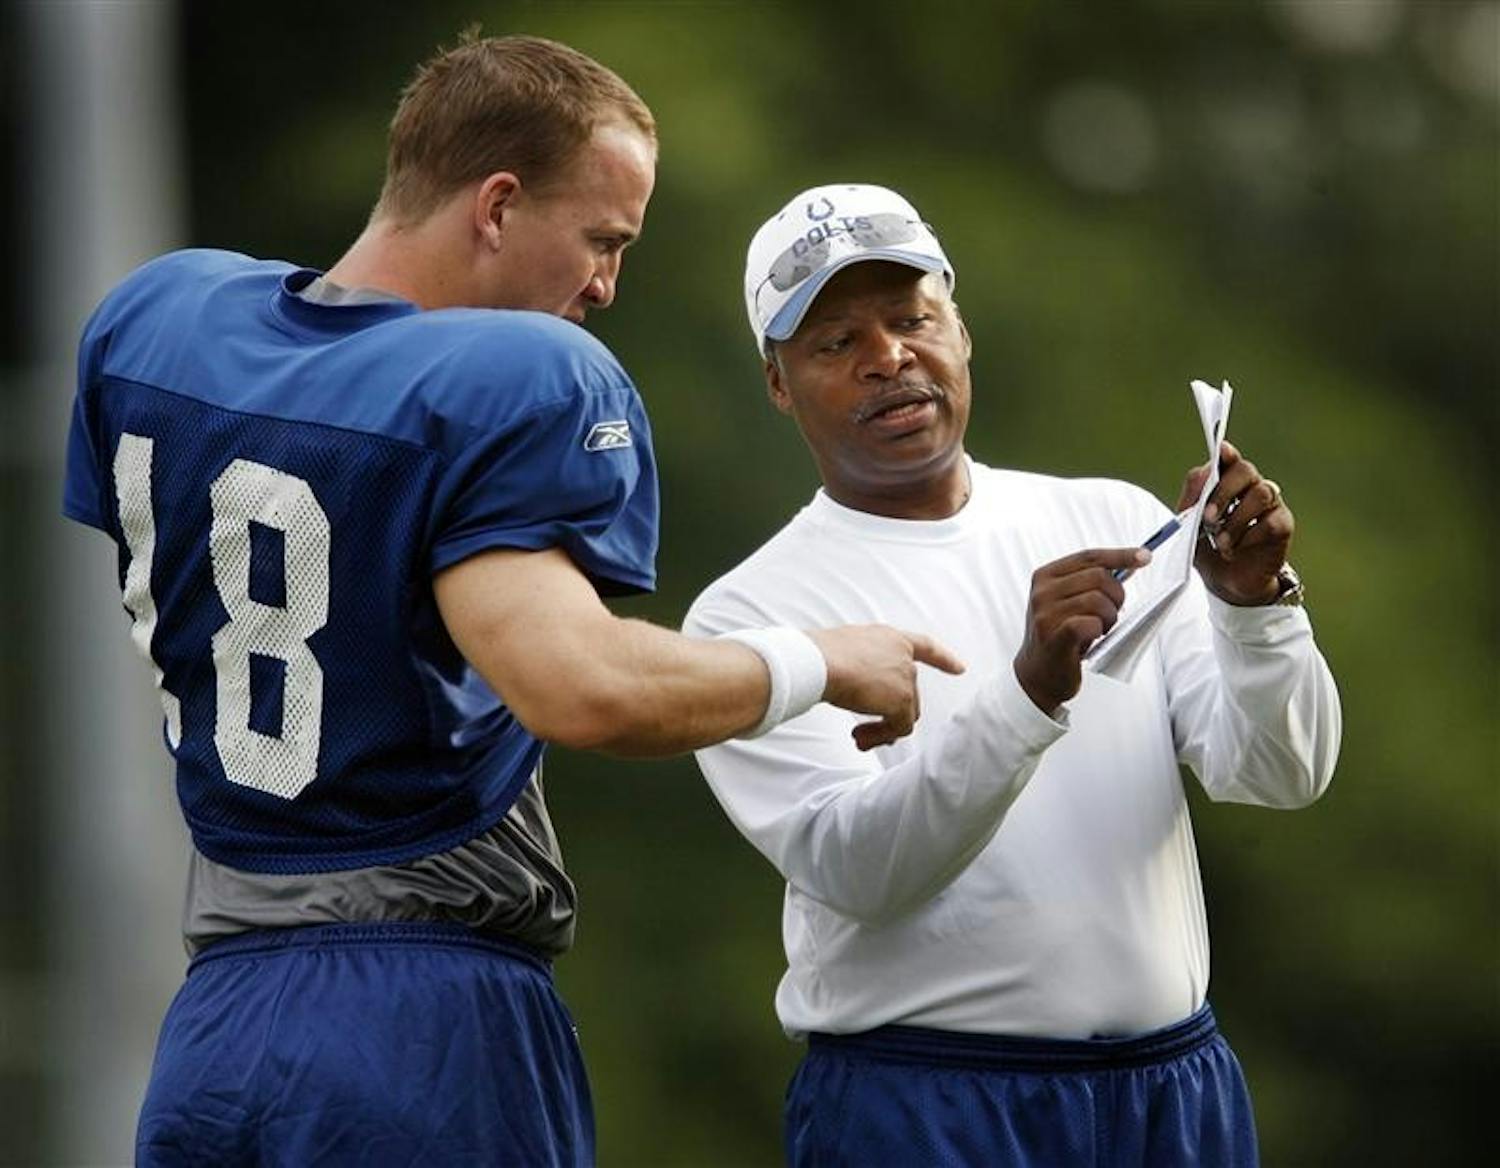 Indianapolis Colts assistant head coach and quarterbacks coach Jim Caldwell, right, talks some plays with Peyton Manning, left, during their practice Thursday afternoon at Rose-Hulman Institute of Technology in Terre Haute.